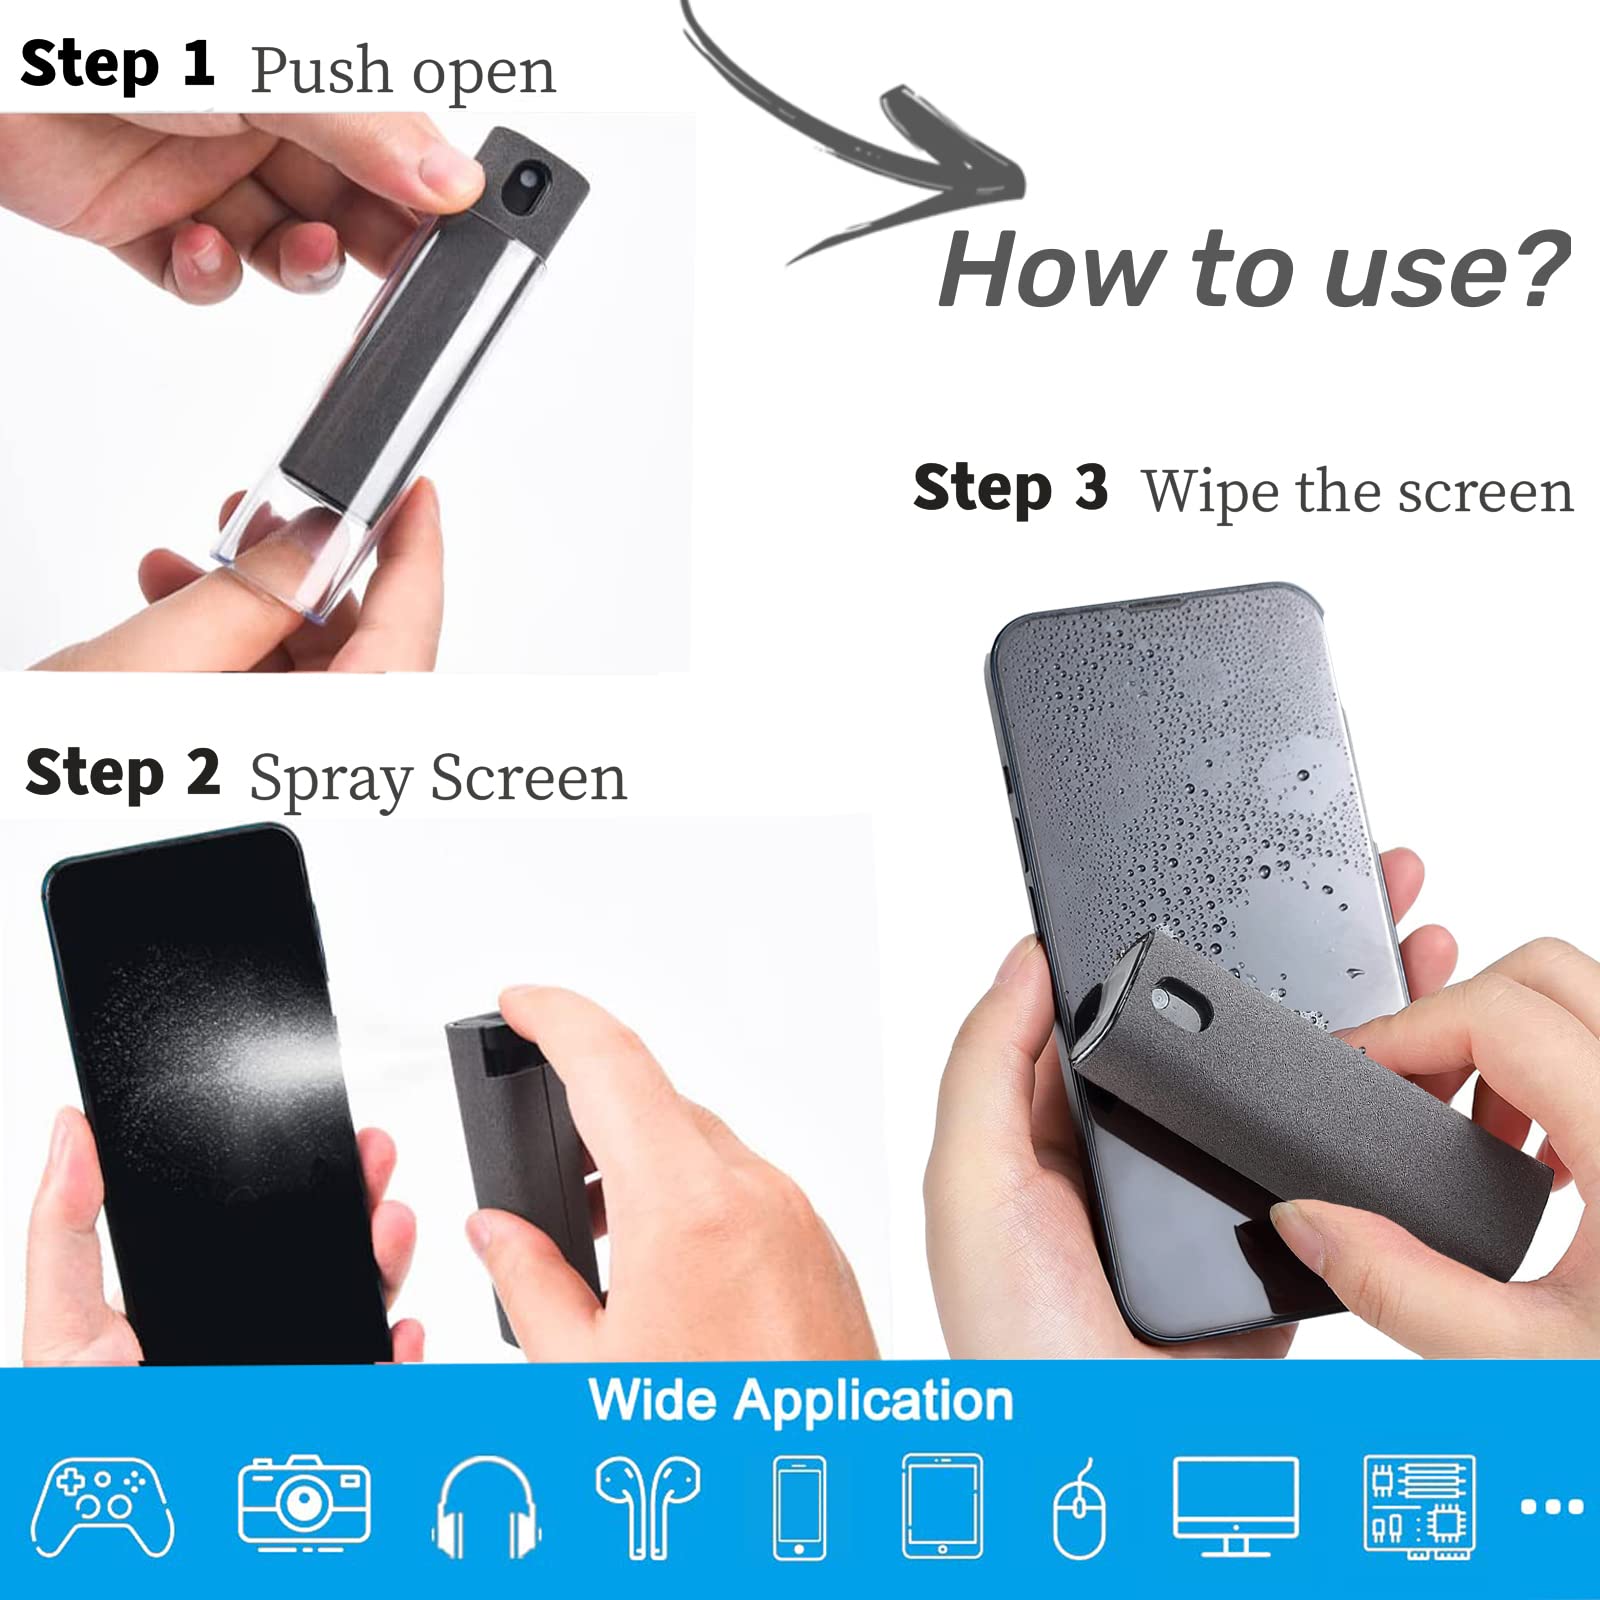 3 in 1Fingerprint Proof Screen Cleaner Tool, Touchscreen Electronic Screen Cleaner, All in One Cleaning Kit with Microfiber and Soft Fiber Flannel for All Phones, Laptop,TV and Tablet Screens (Grey)